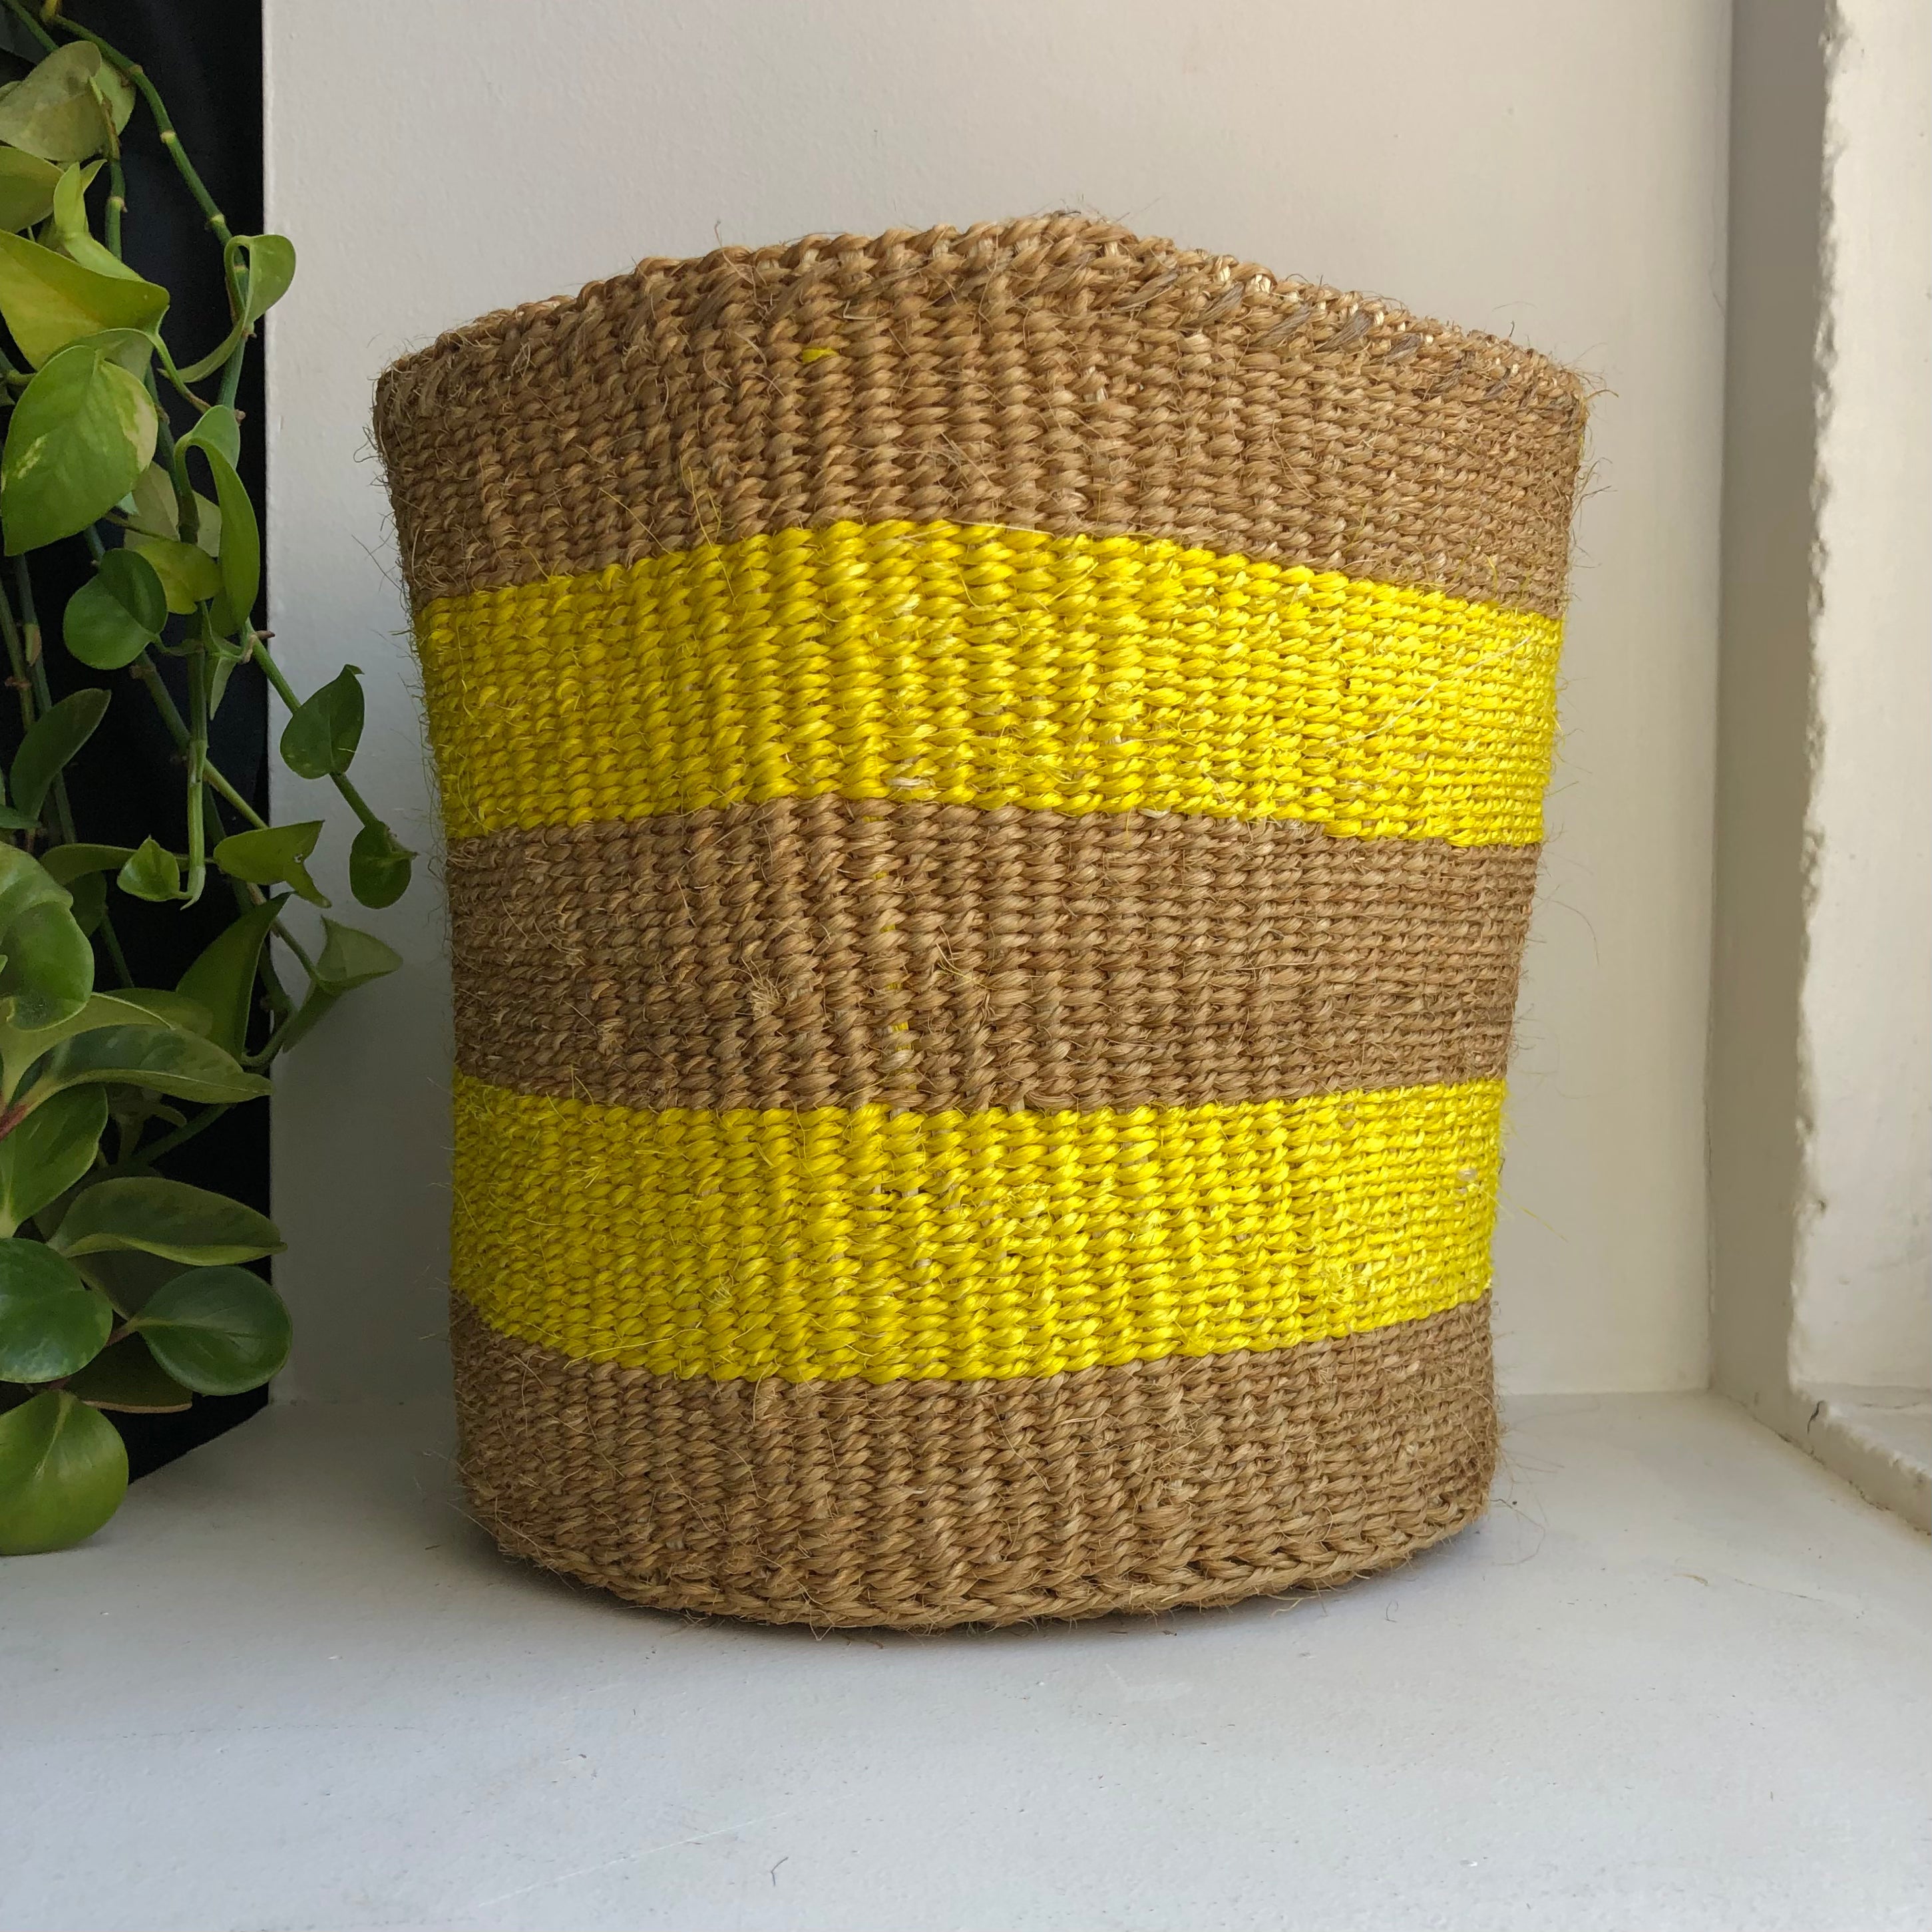 10" woven sisal basket with yellow tripes